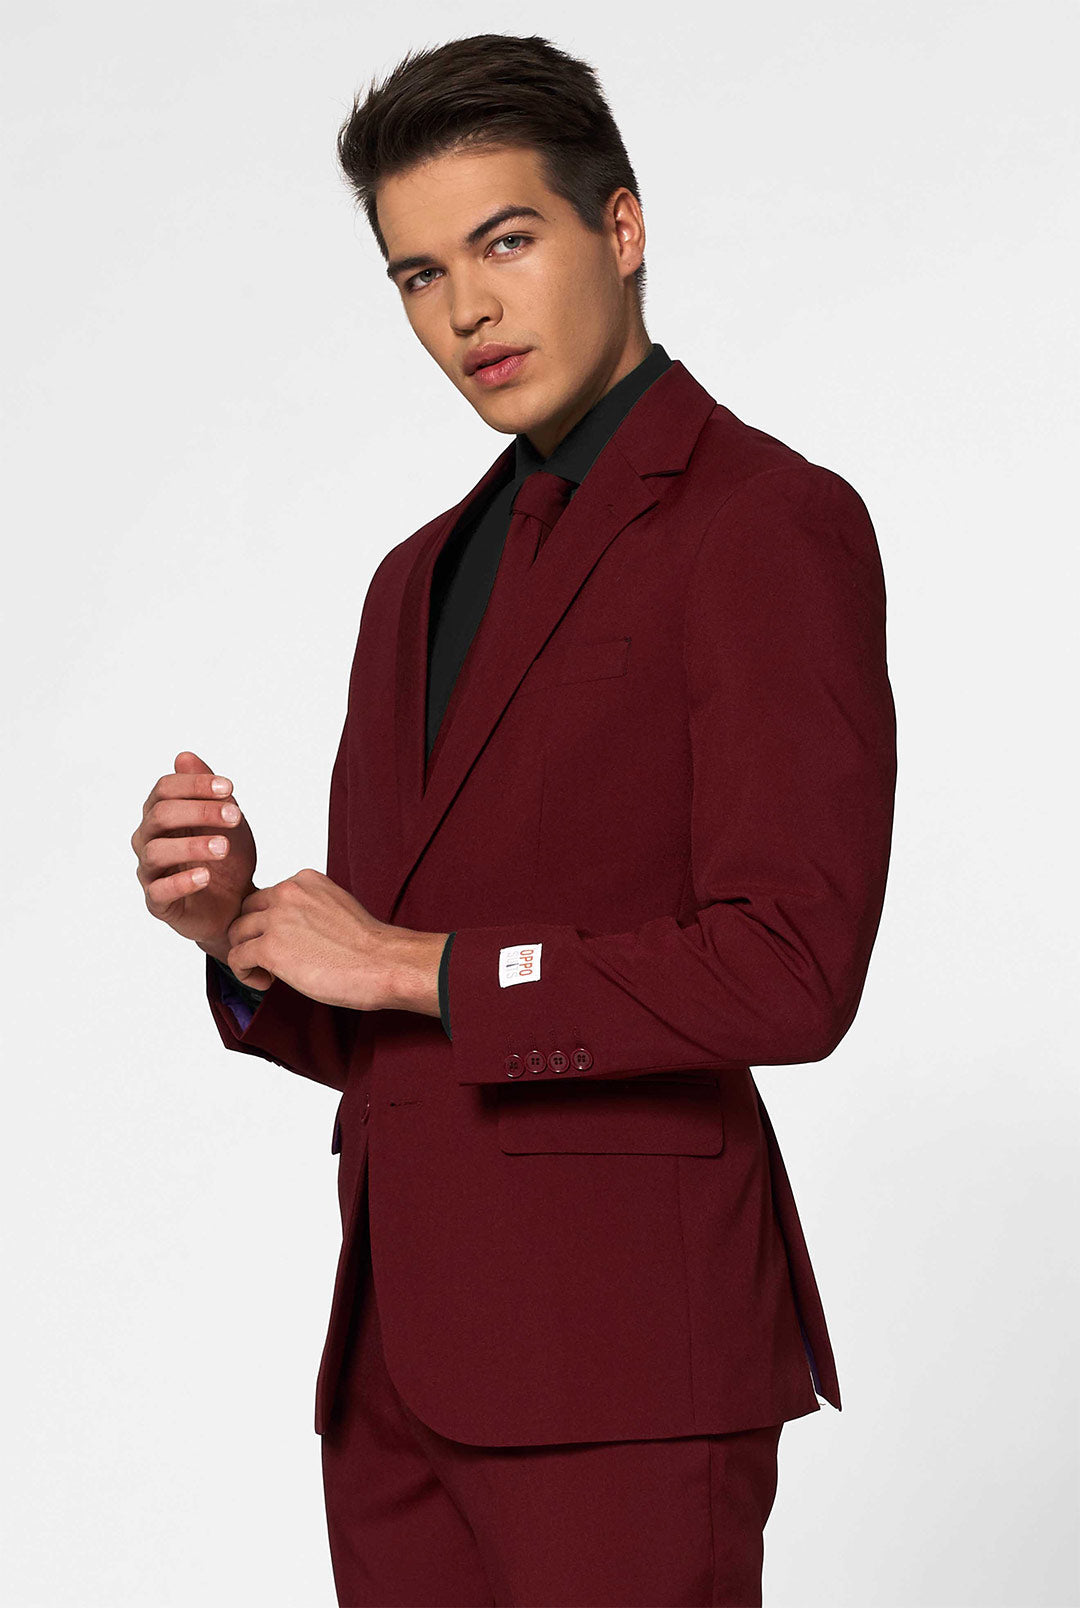 Burgundy 2 Button Suits Starting At $199 - Mensuits.com